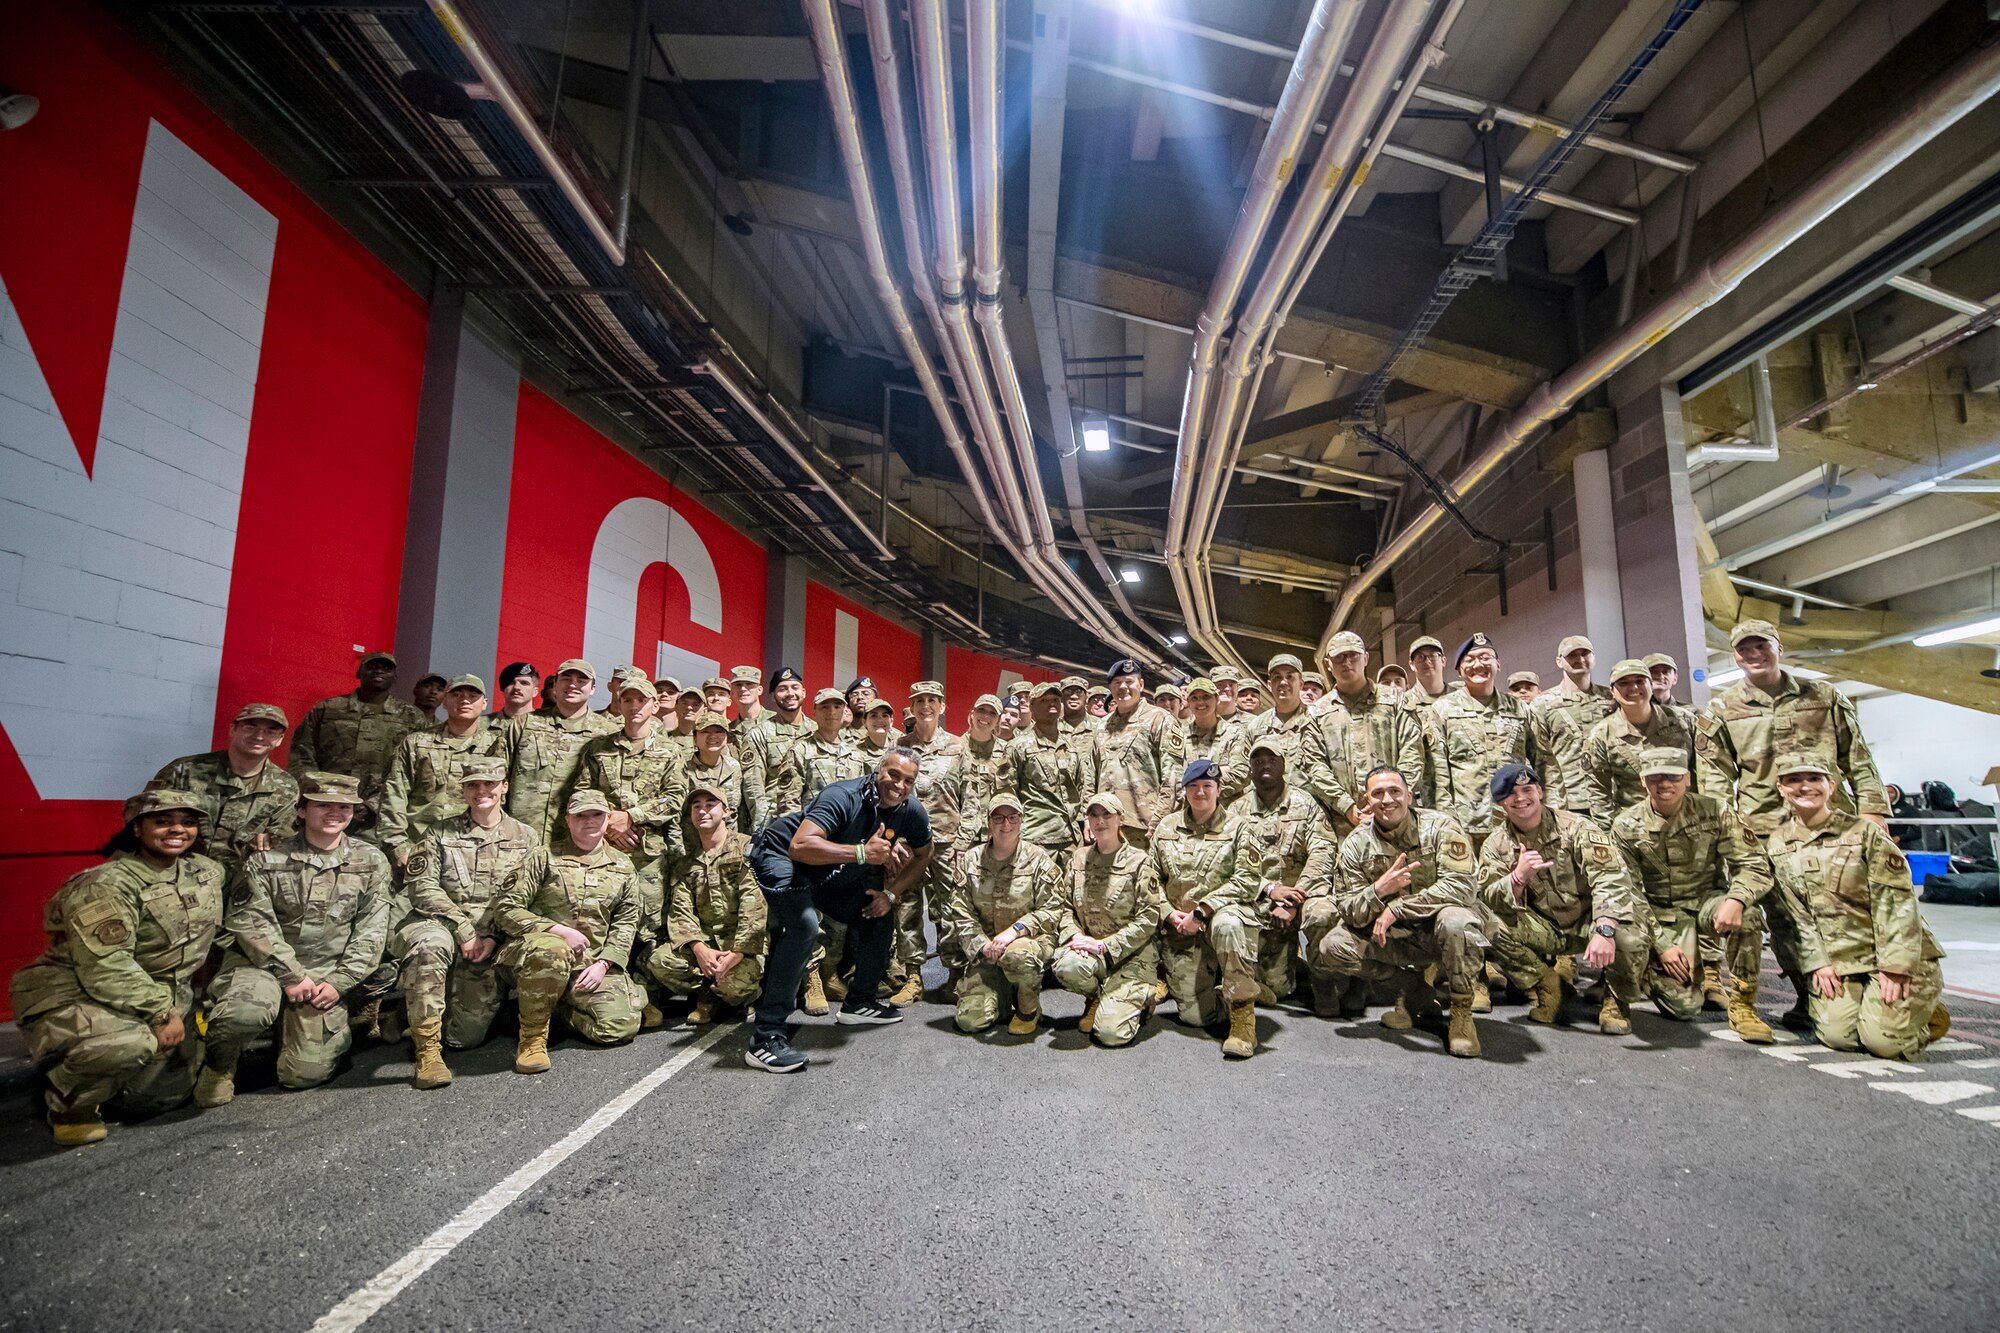 Airmen from the 501st Combat Support Wing pose for a group photo following the national anthem at Wembley Stadium, in London, England, Oct. 30, 2022. Approximately 70 uniformed personnel represented the U.S. Air Force and nation by unveiling an American flag during the pre-game ceremonies of the Jacksonville Jaguars and Denver Broncos NFL game. (U.S. Air Force photo by Staff Sgt. Eugene Oliver)